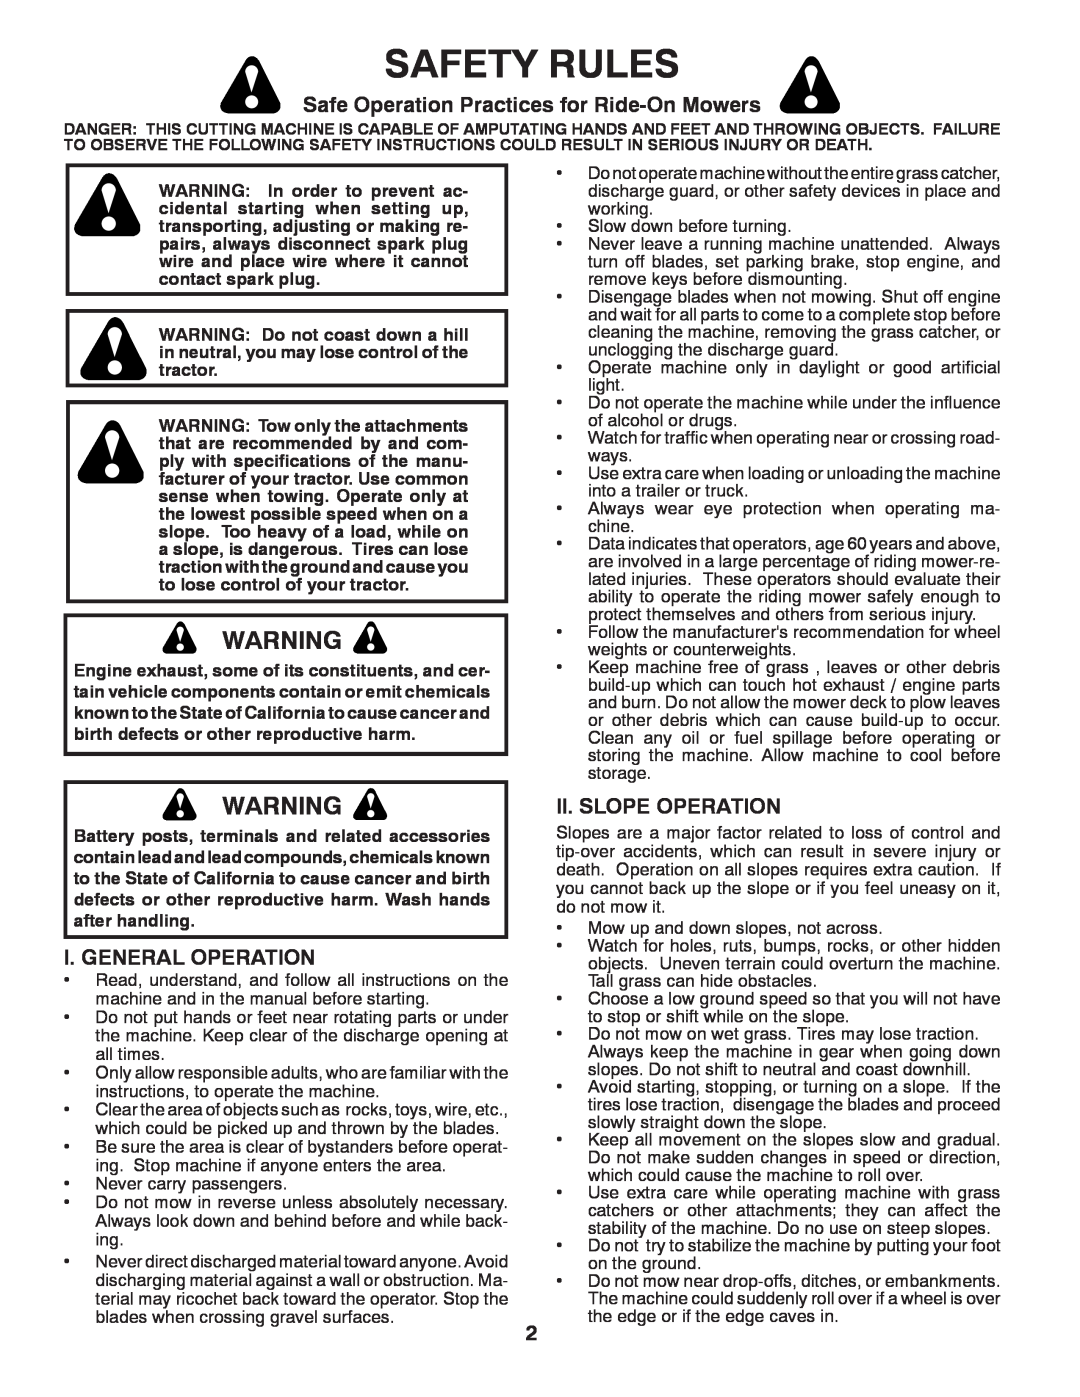 Poulan 412412 manual Safety Rules, Safe Operation Practices for Ride-On Mowers, I. General Operation, Ii. Slope Operation 